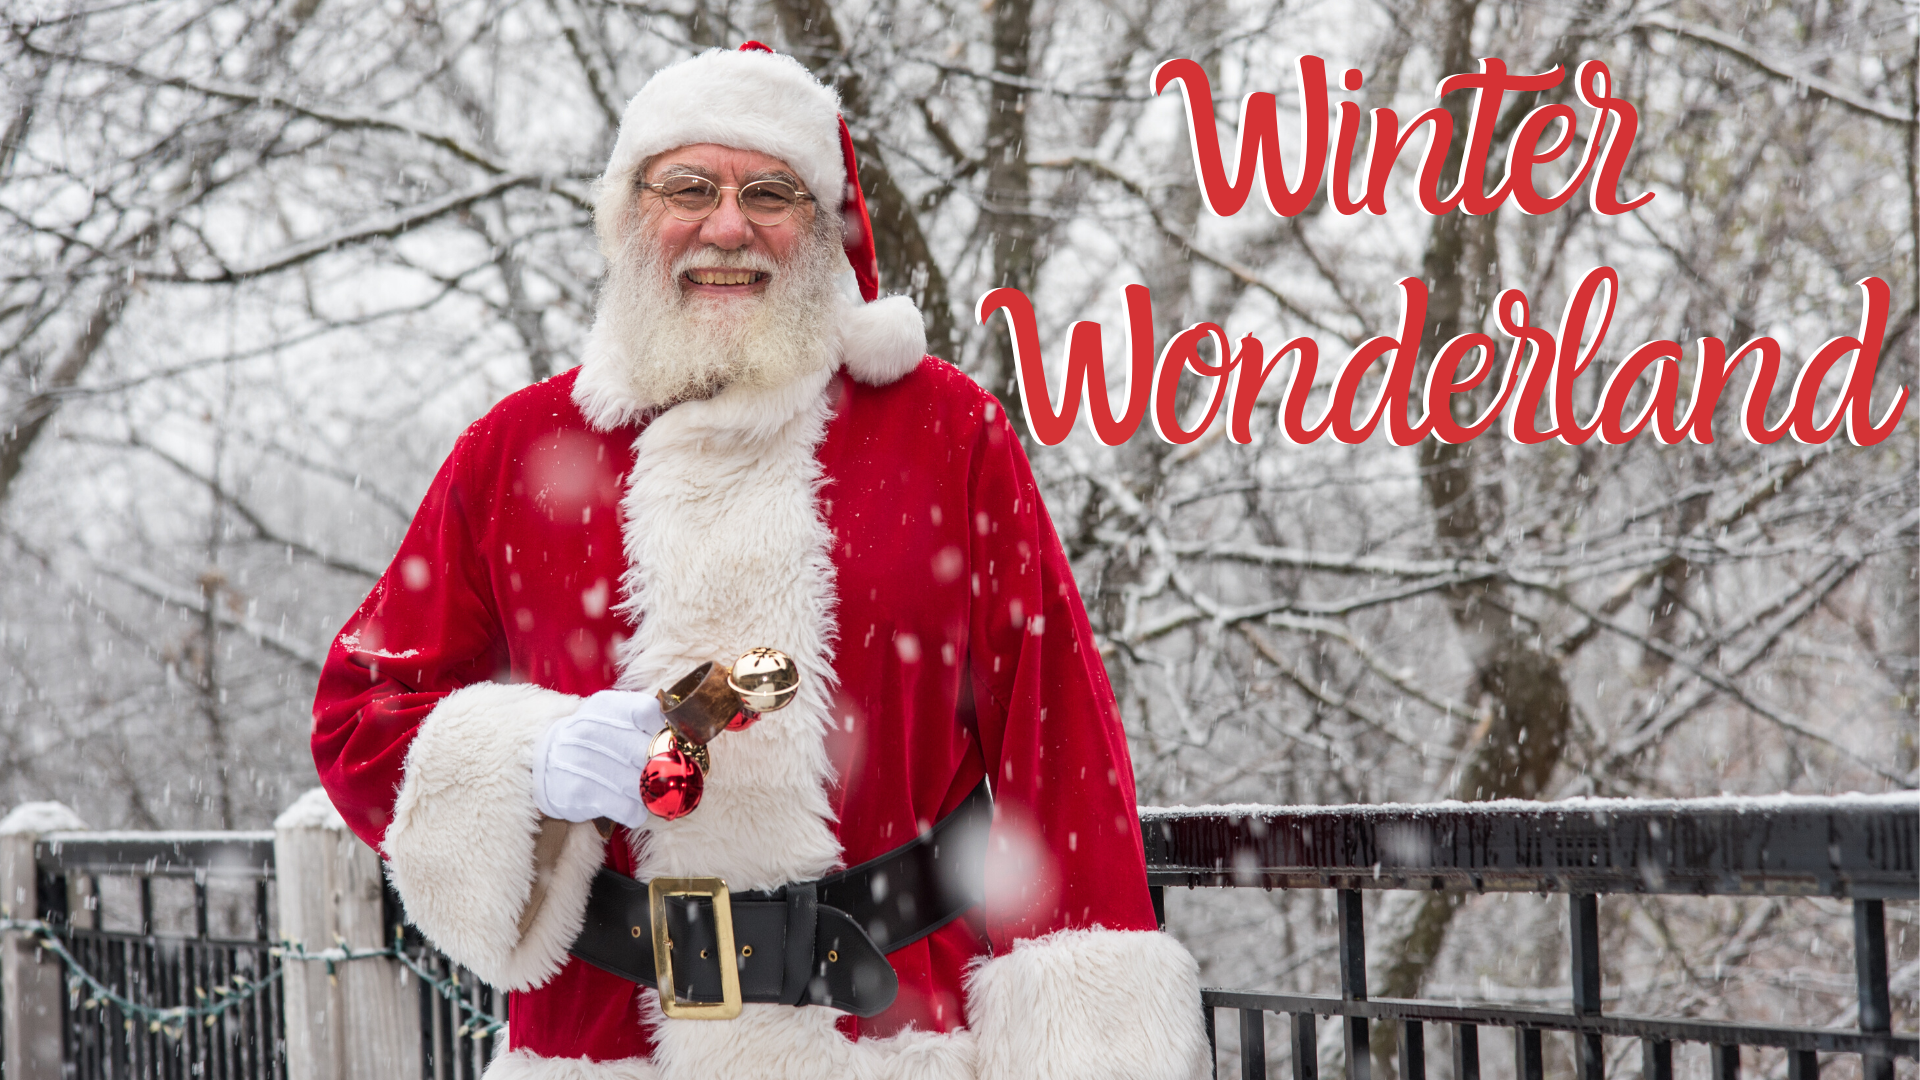 Santa Claus next to a railing in the winter time with snow. It has the text in red, "Winter Wonderland"